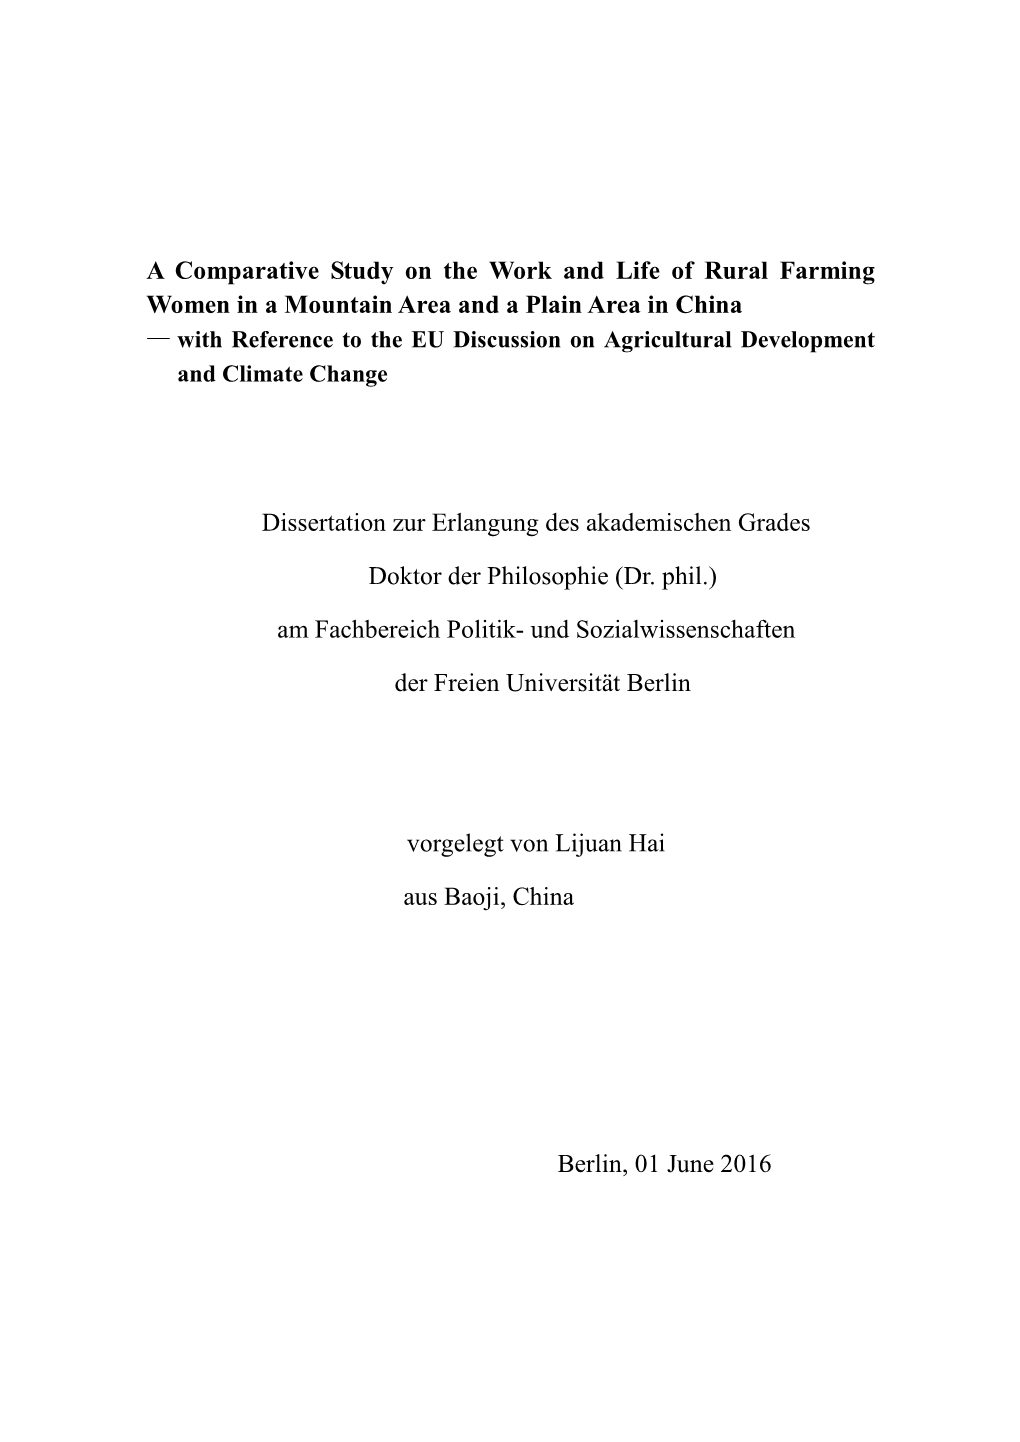 A Comparative Study on the Work and Life of Rural Farming Women in A